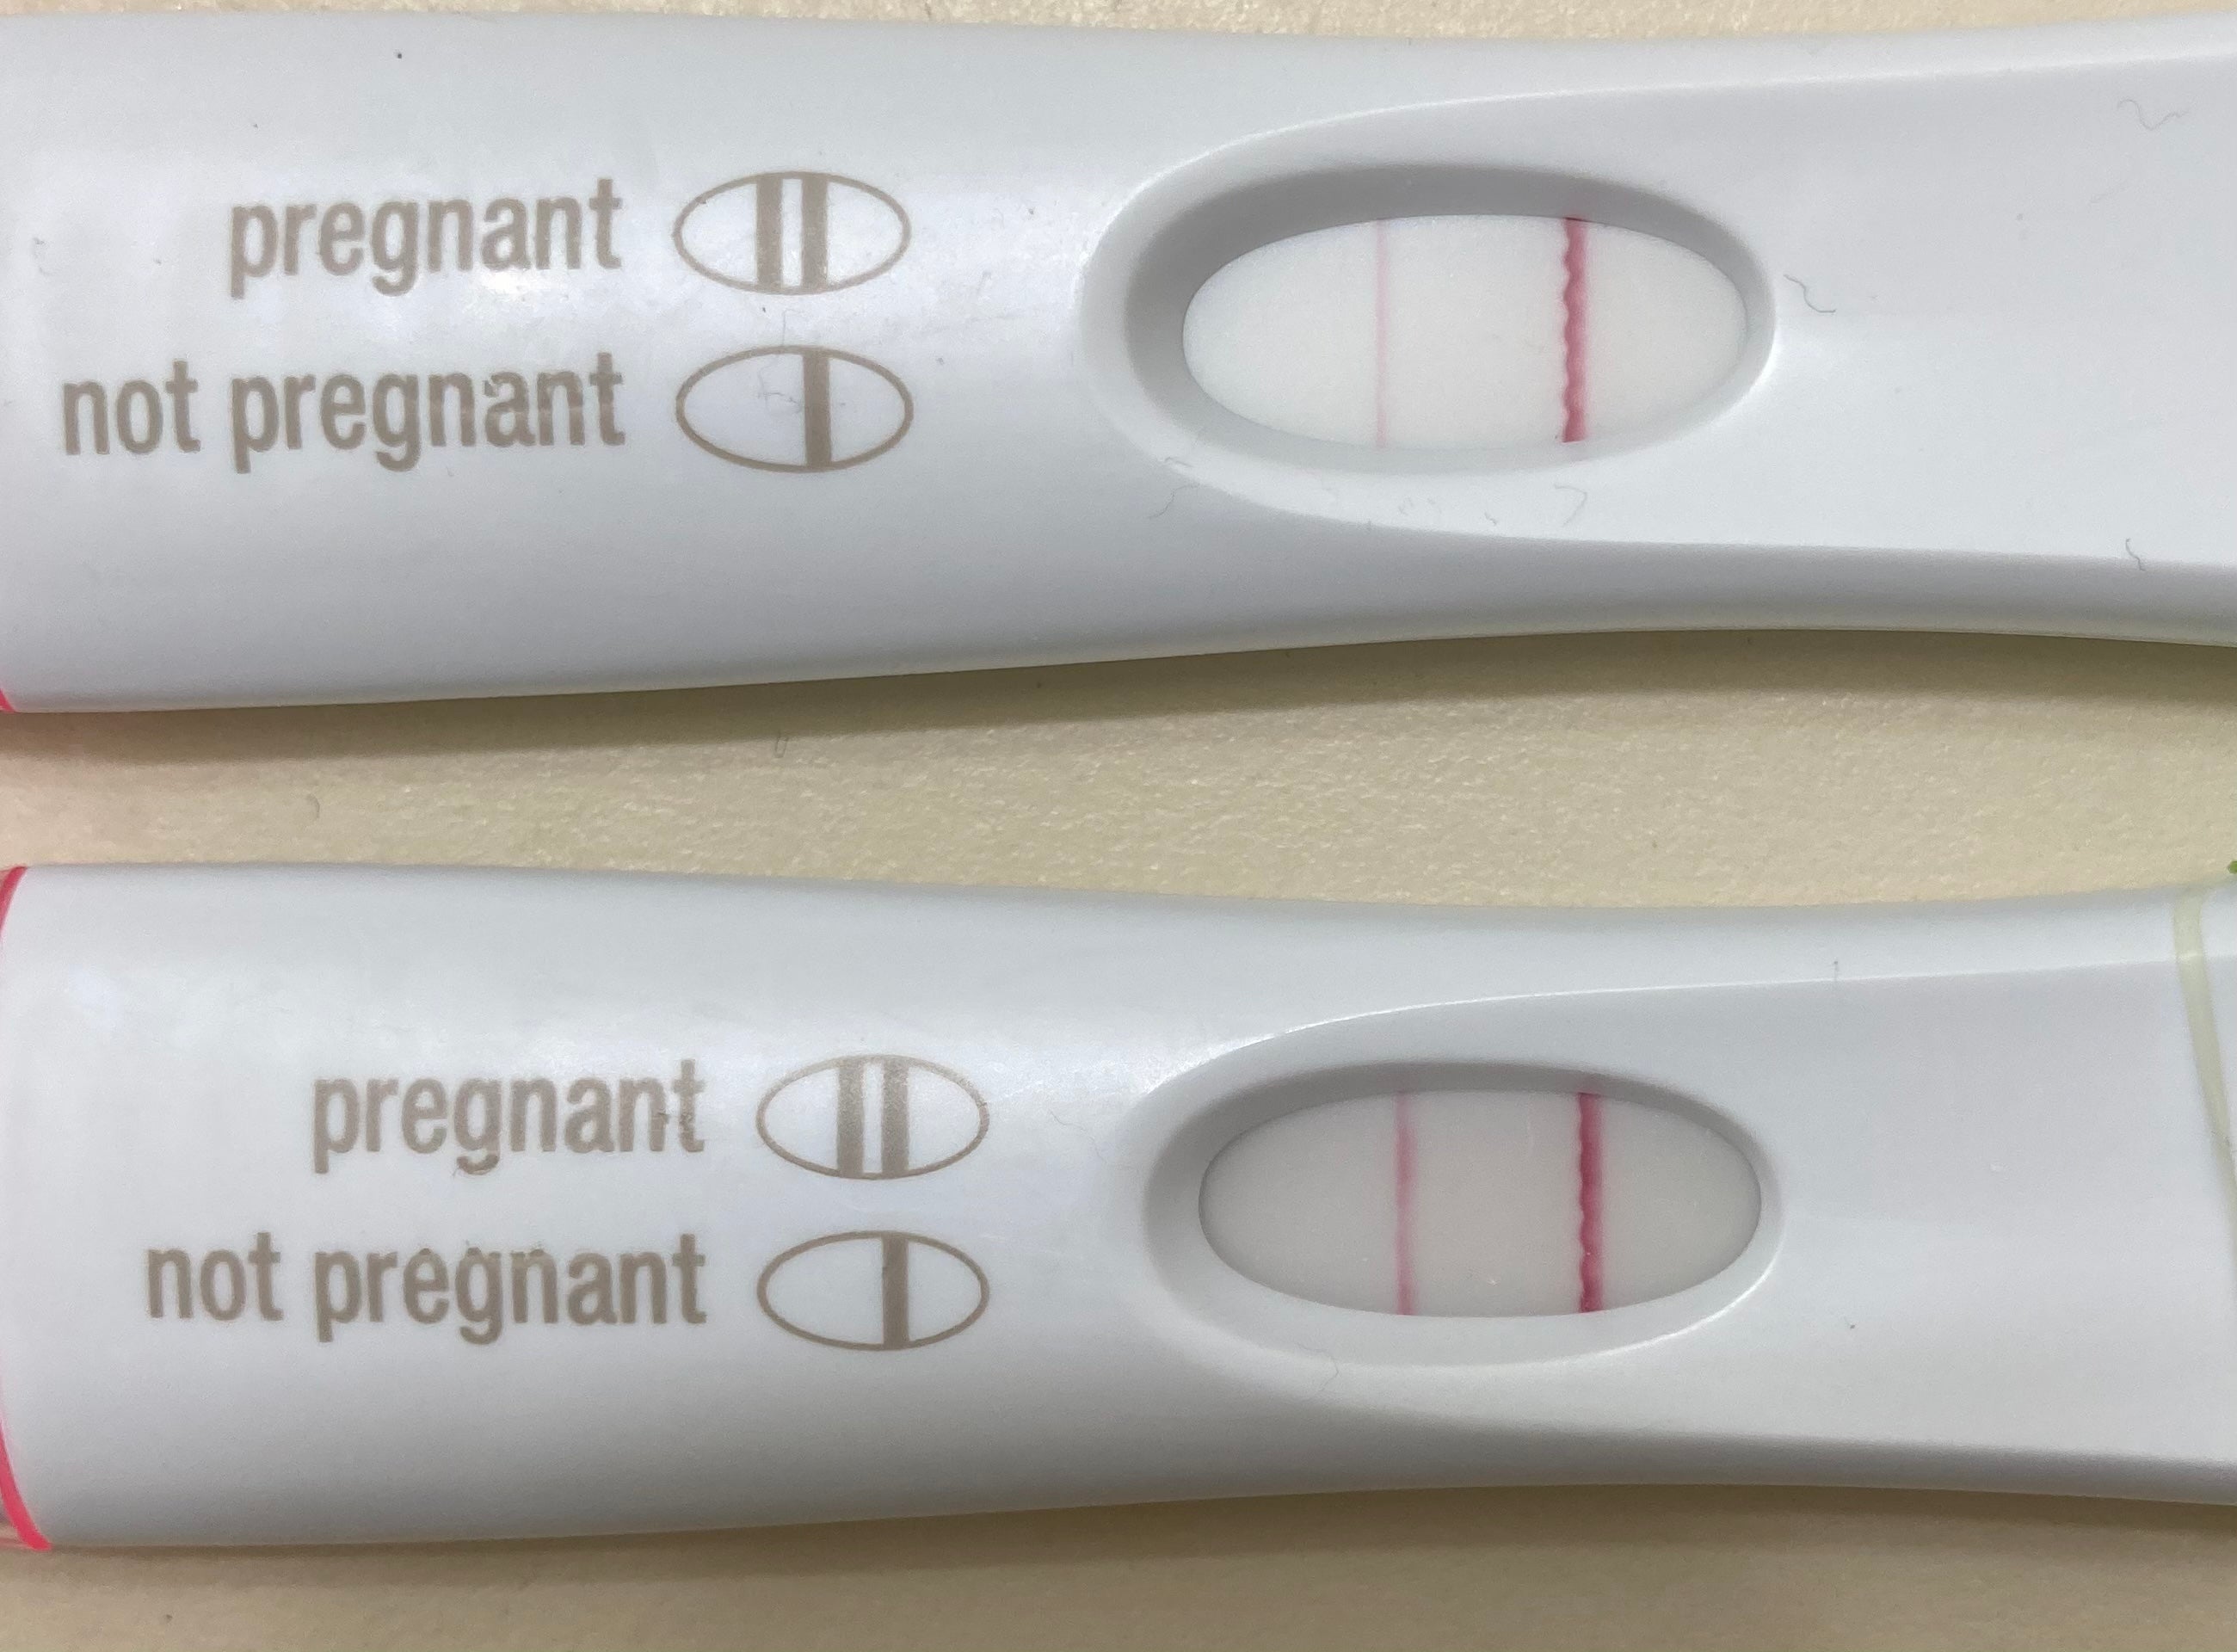 Two positive pregnancy tests